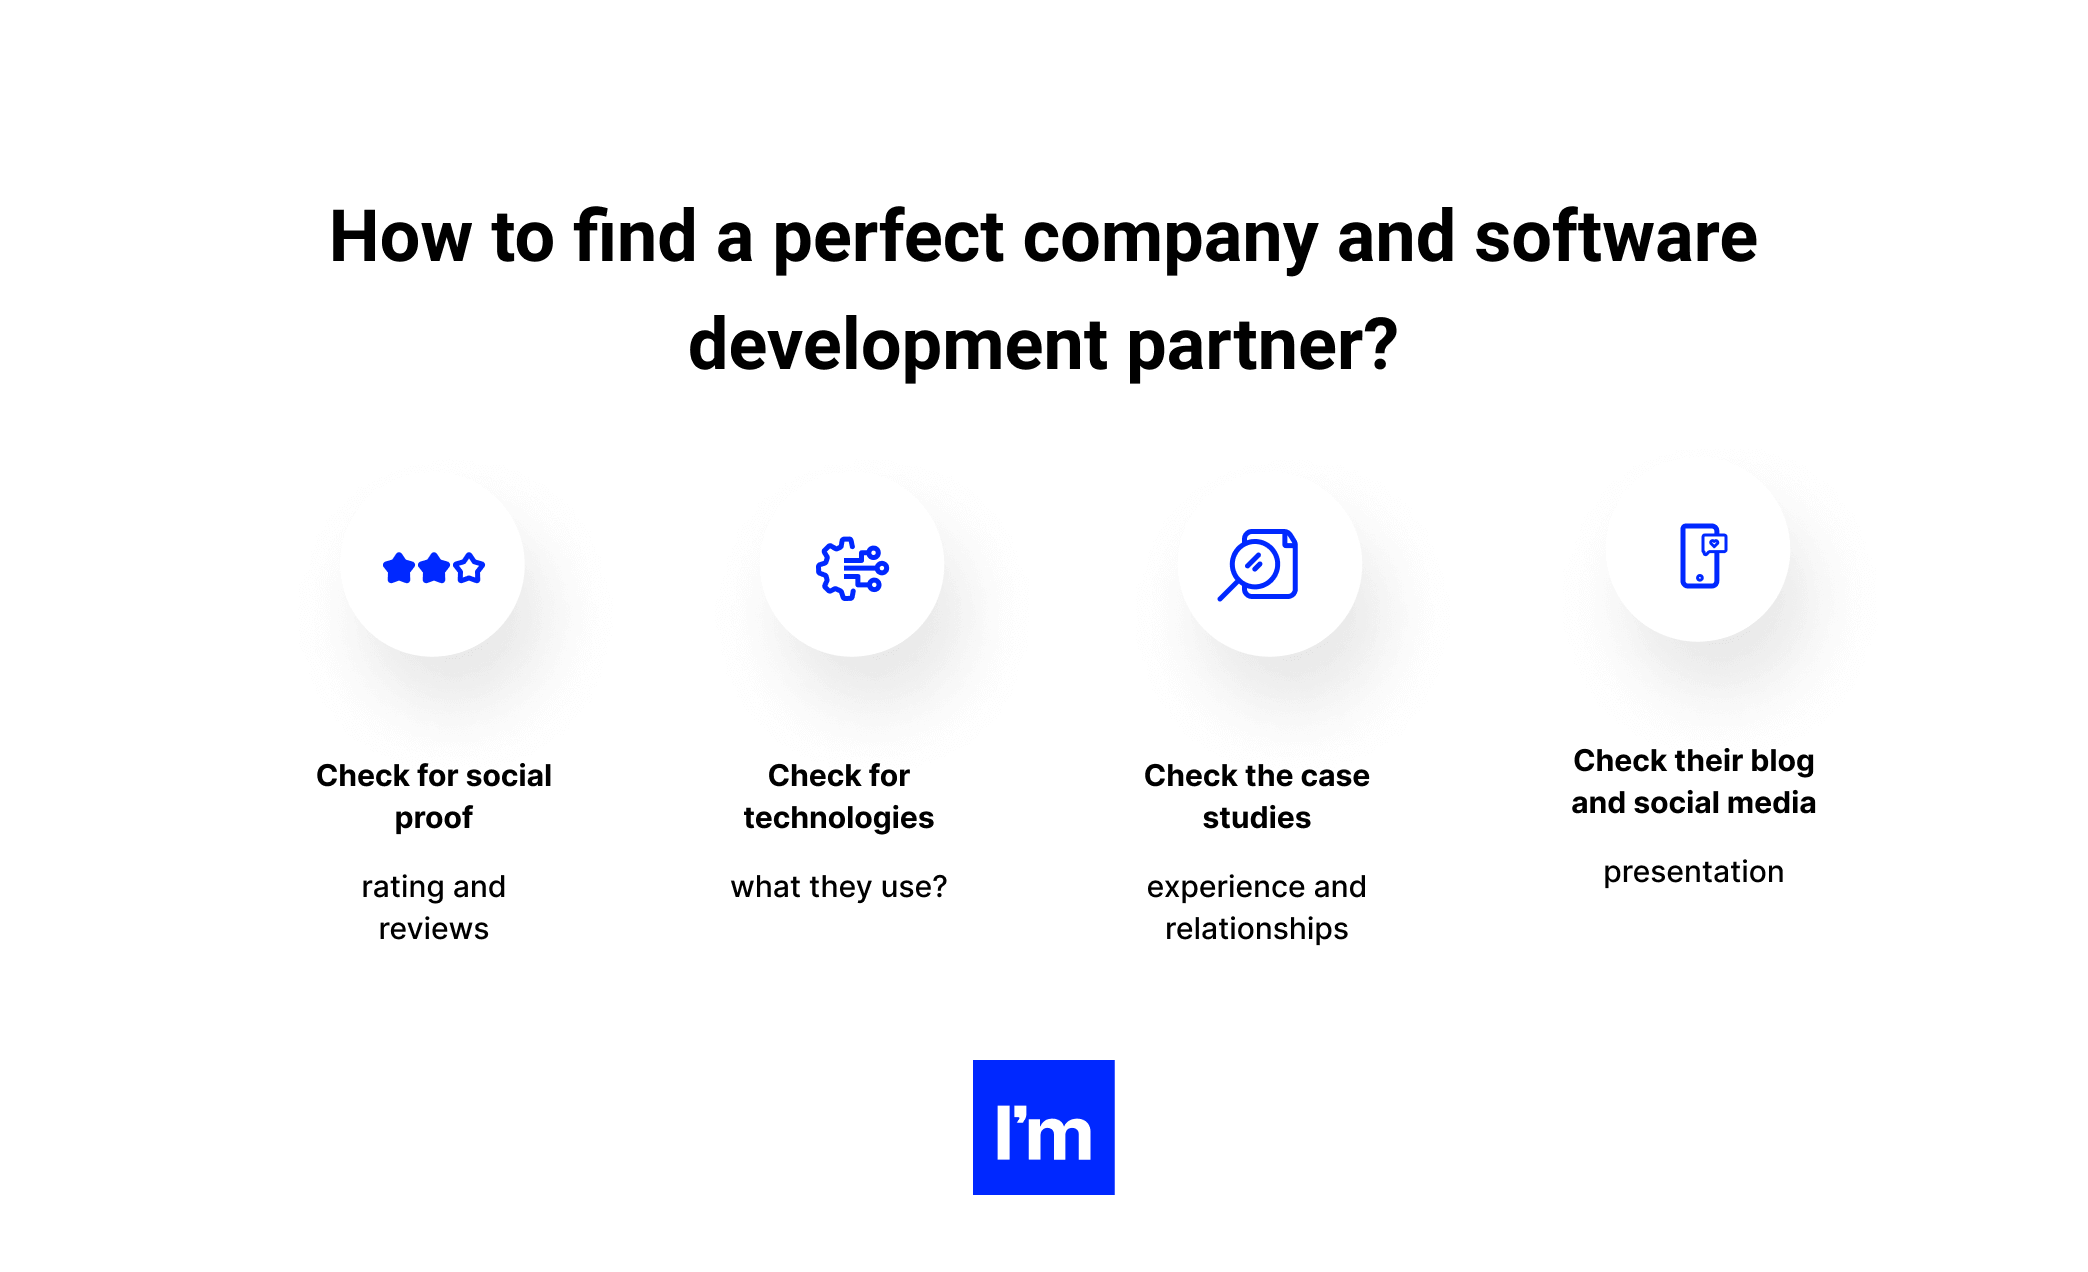 How To Find A Perfect Custom Healthcare Software Development Company_ - INFOGRAPHIC 4